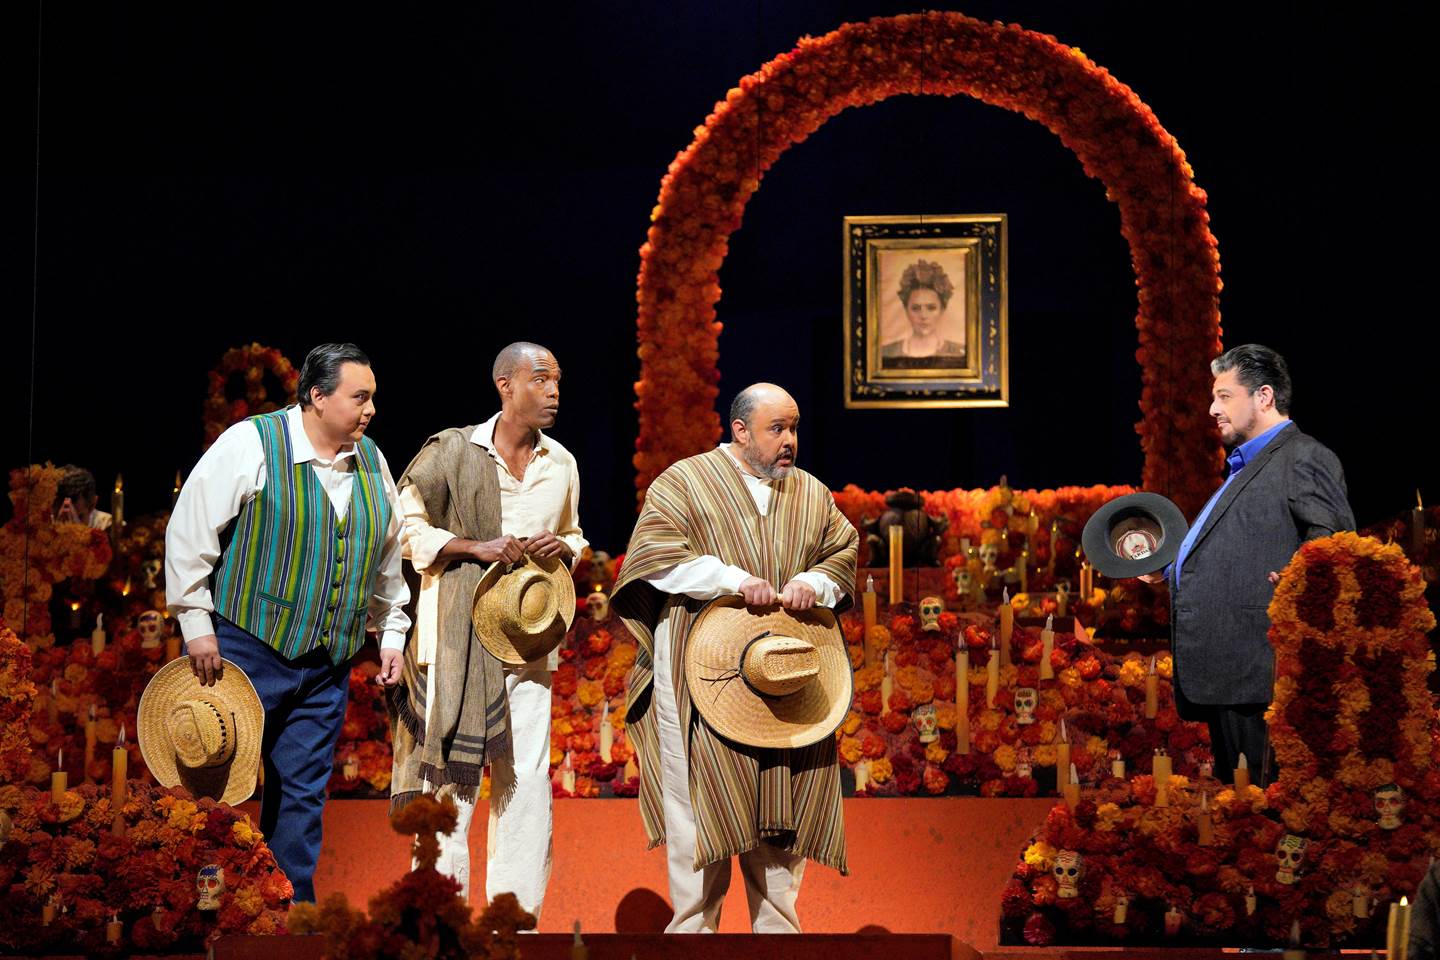 Scene from Frida with three men with their hats off talking to a man in a black suit